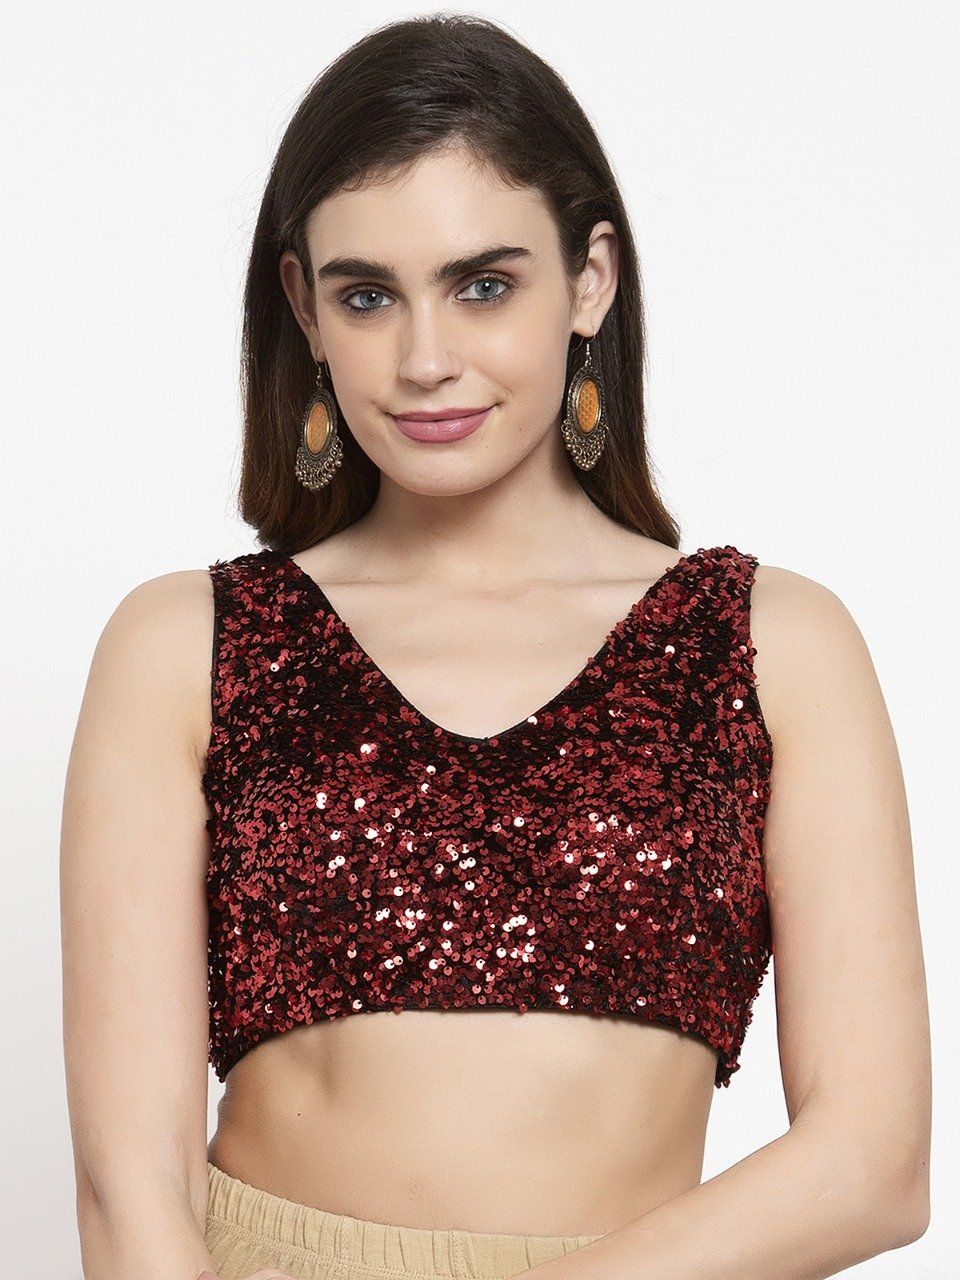 Saree Blouse Top in Shimmering Cherry Red - Indian Clothing in Denver, CO, Aurora, CO, Boulder, CO, Fort Collins, CO, Colorado Springs, CO, Parker, CO, Highlands Ranch, CO, Cherry Creek, CO, Centennial, CO, and Longmont, CO. Nationwide shipping USA - India Fashion X